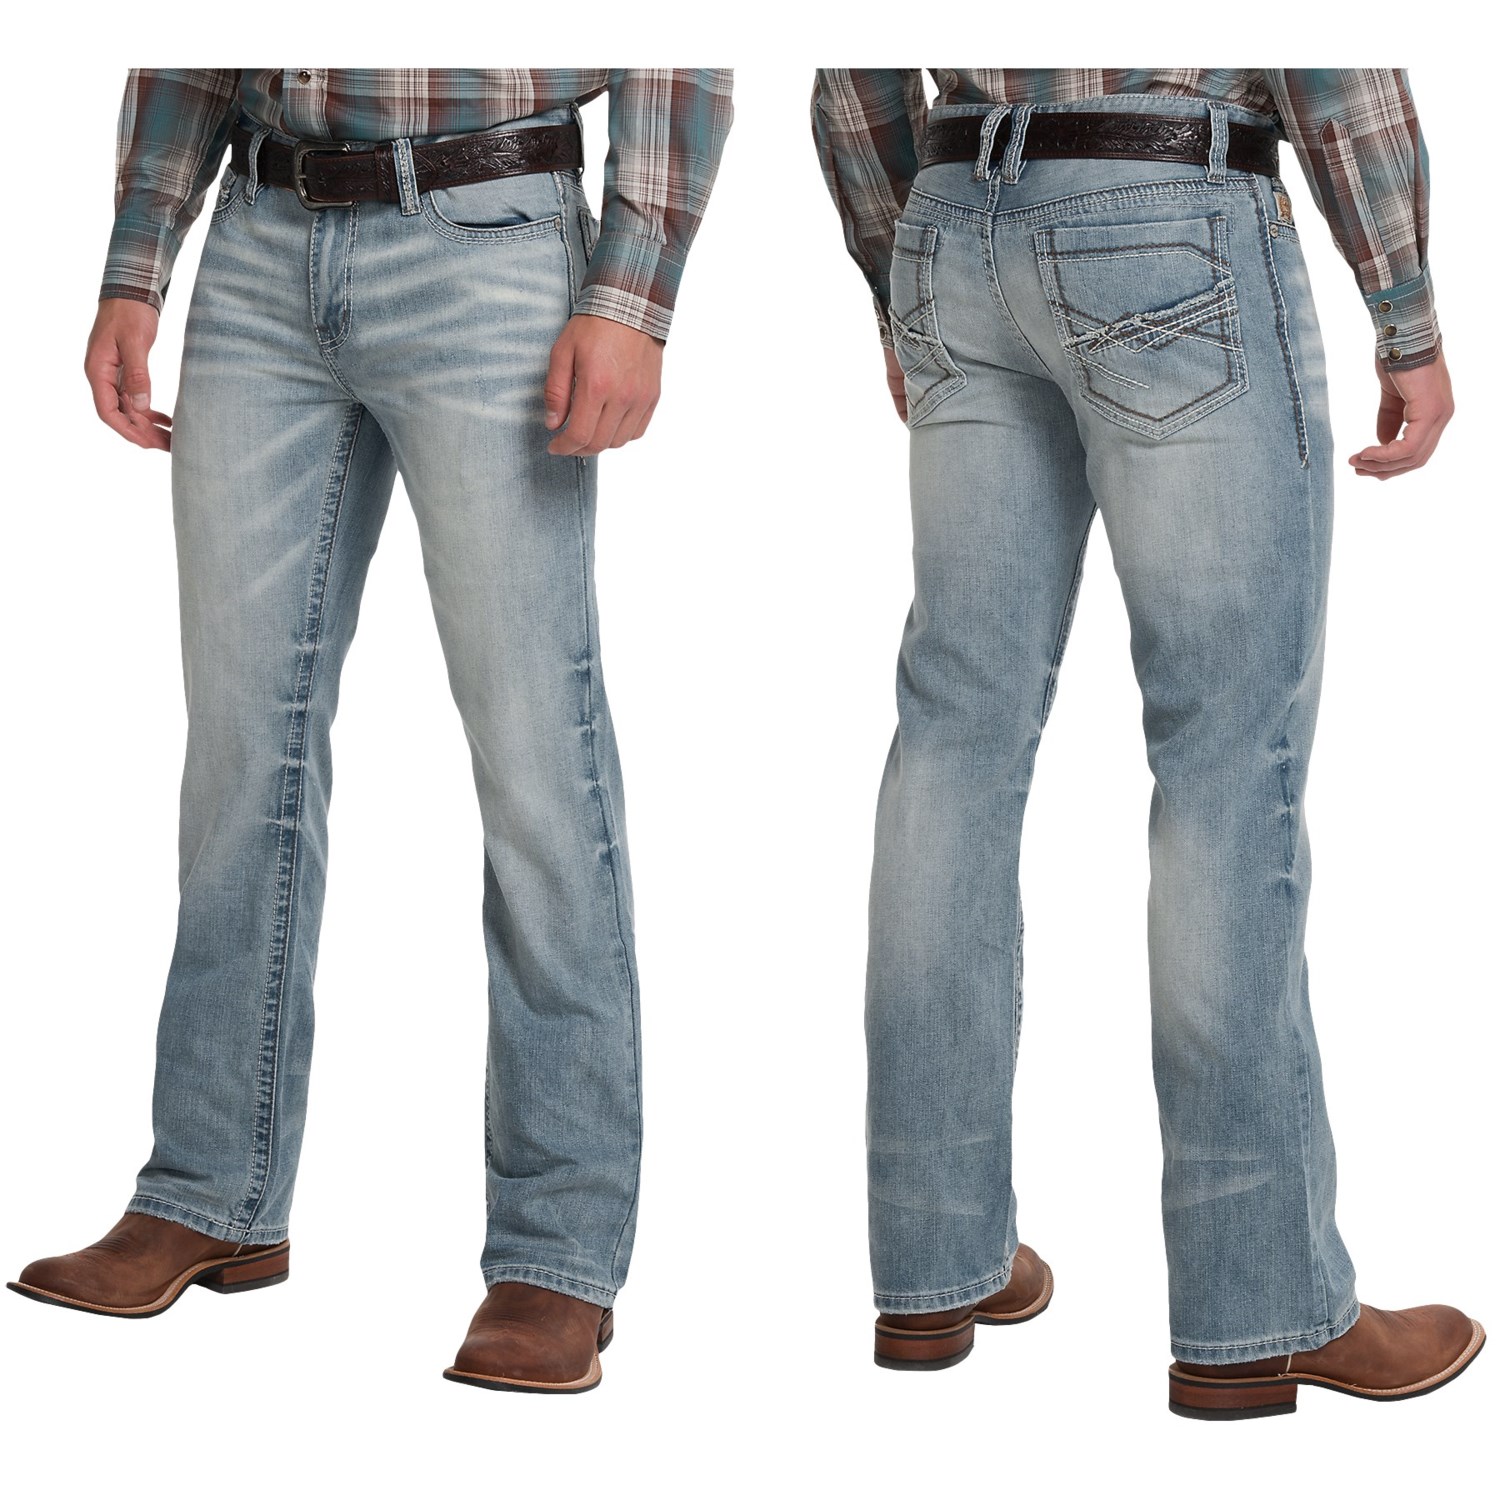 Cinch Ian Mid-Rise Slim Jeans (For Men) 7575D - Save 63%